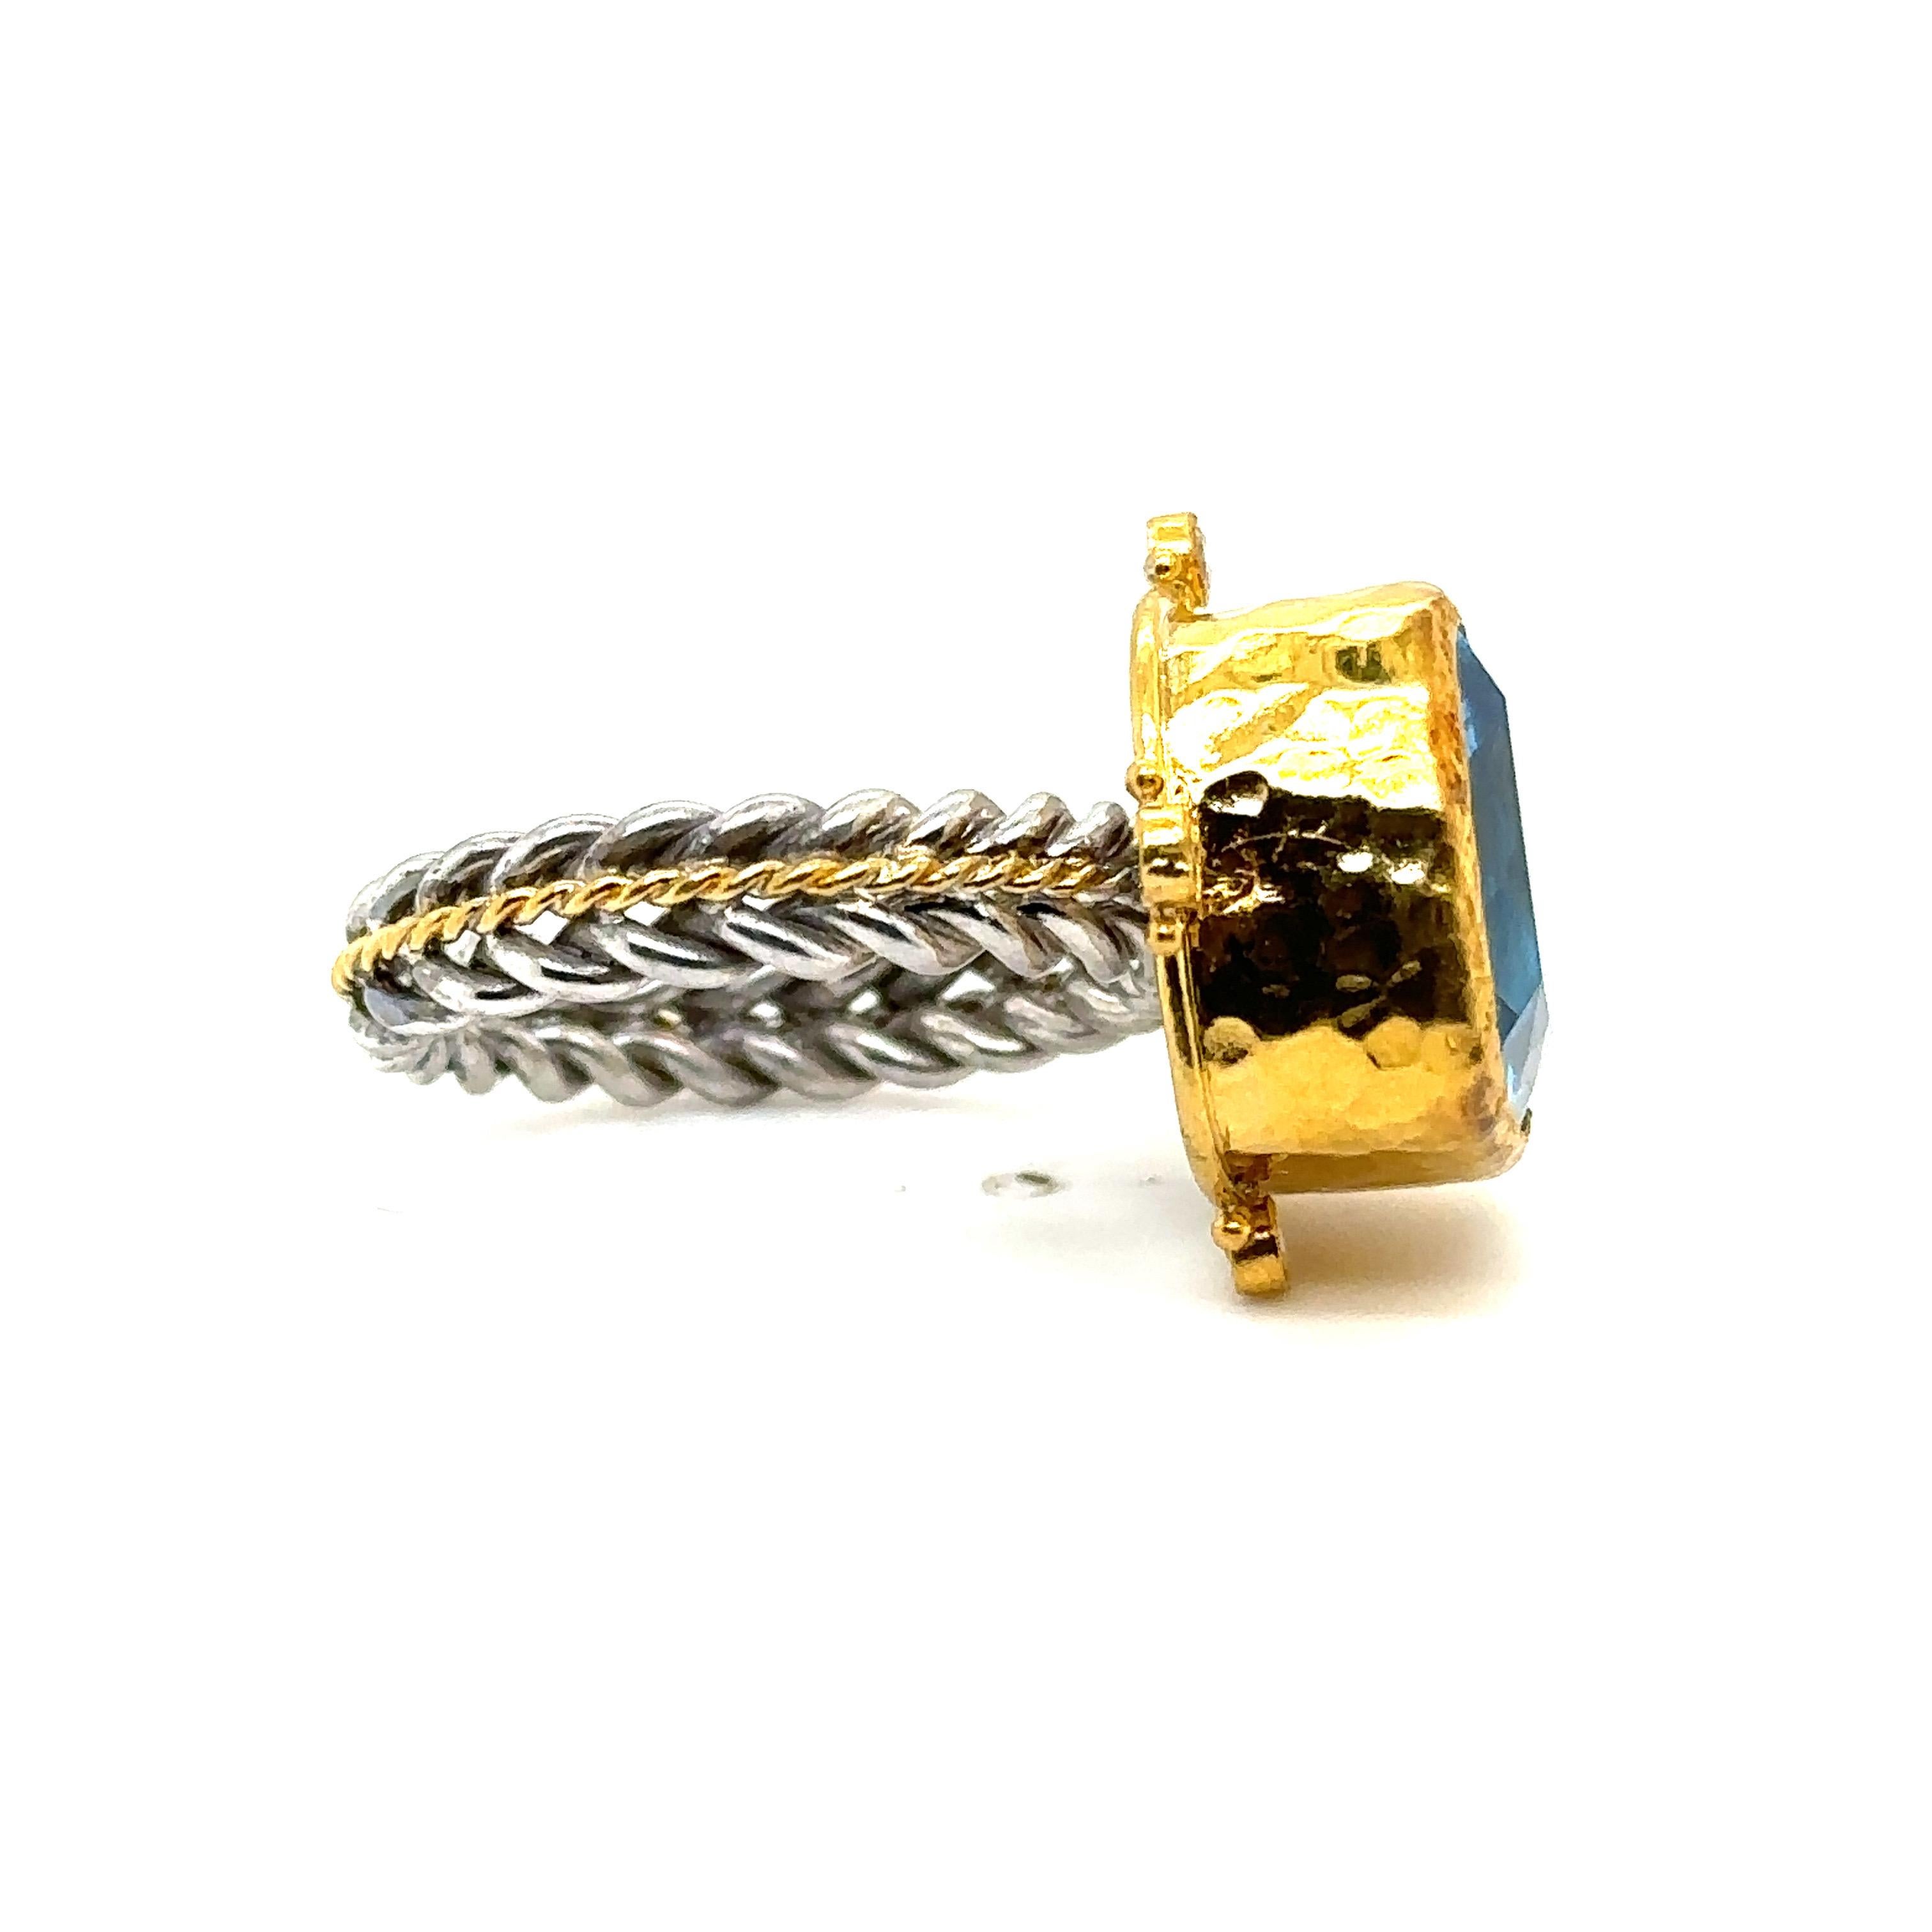 JAS-19-1995 - 24K GOLD/STERLING SILVER RING 0.10Ct DIAS.  For Sale 2